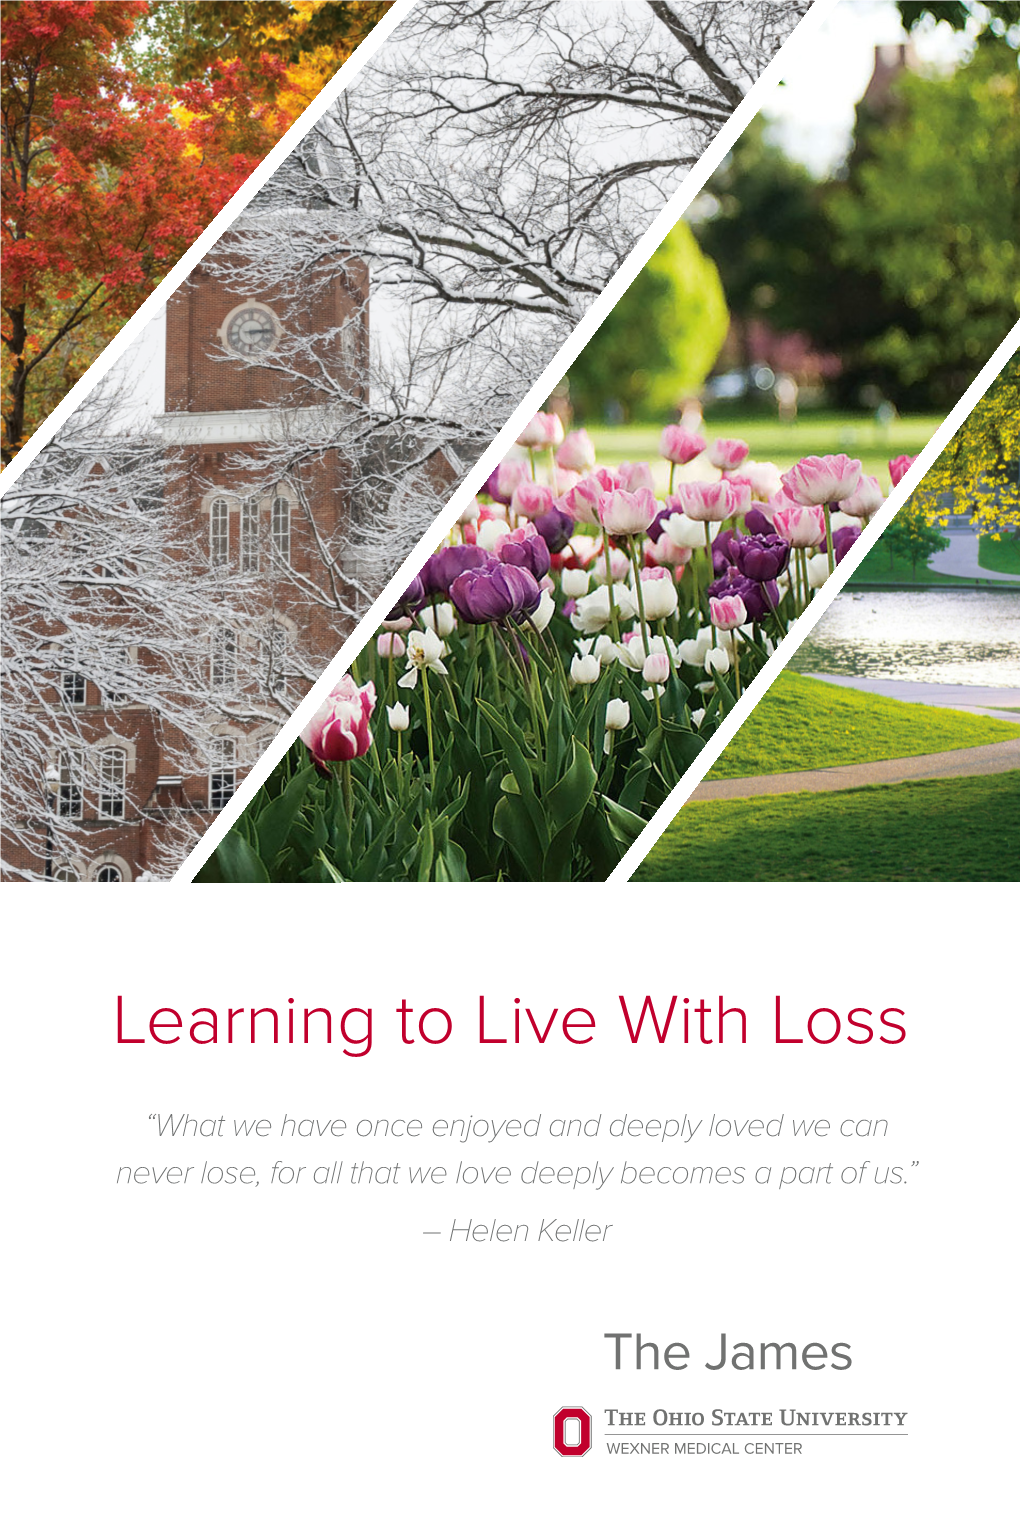 Grief Booklet: "Learning to Live with Loss"